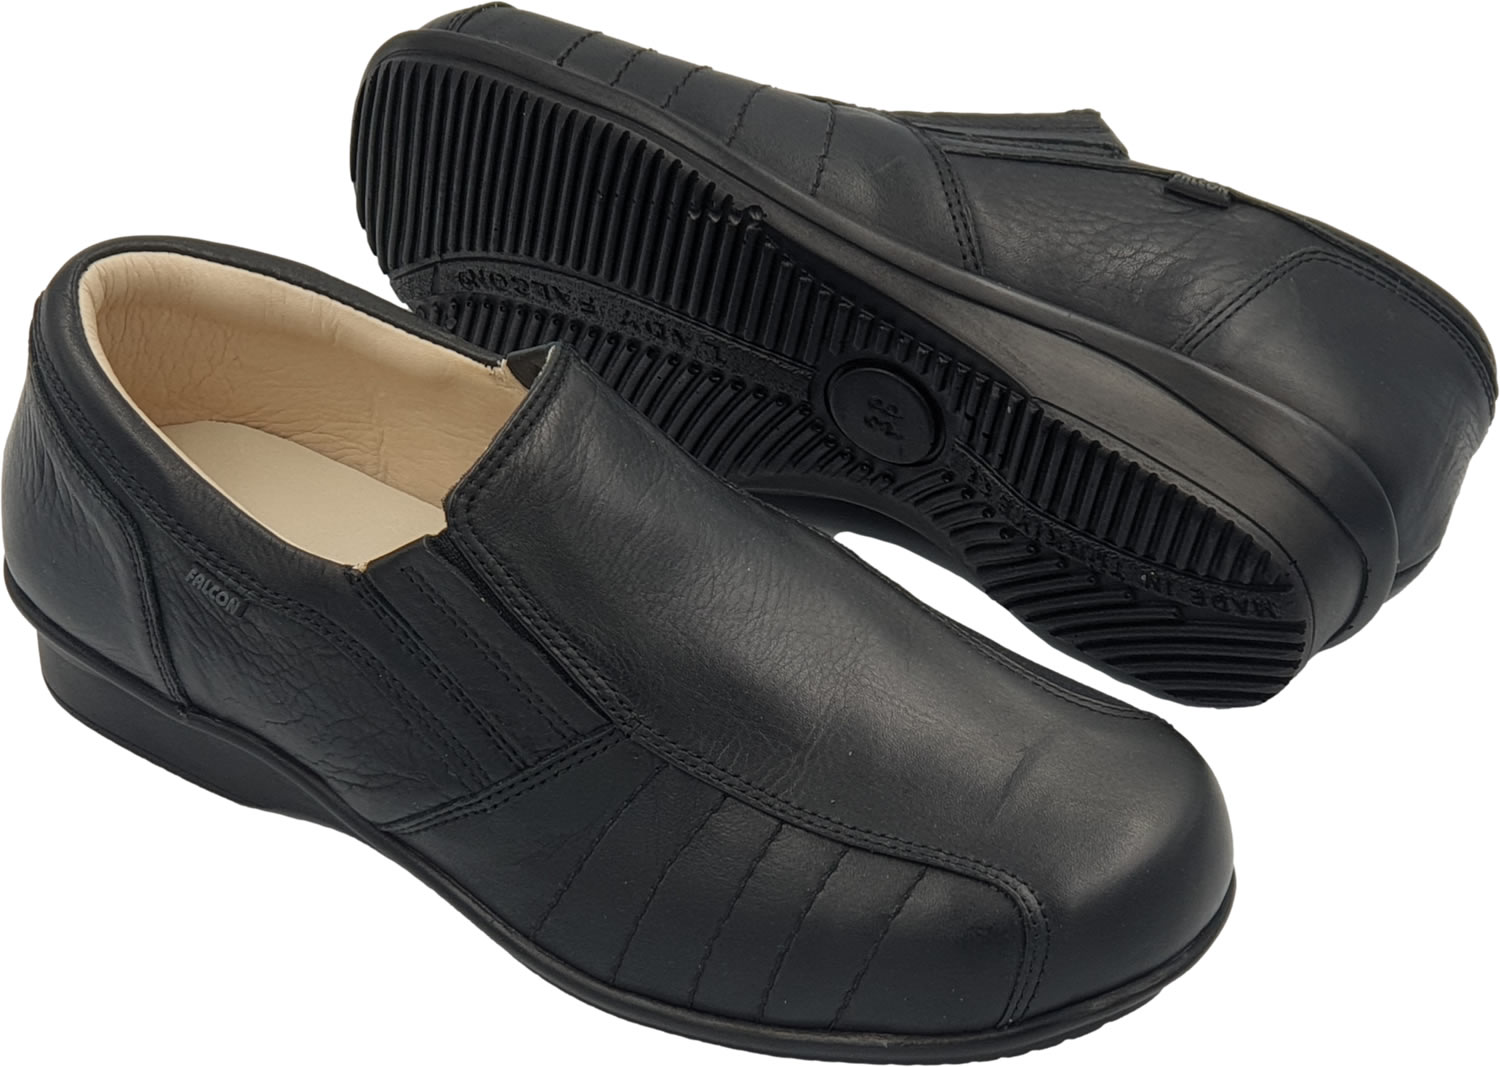 Women's Comfortable Shoes For Bunions